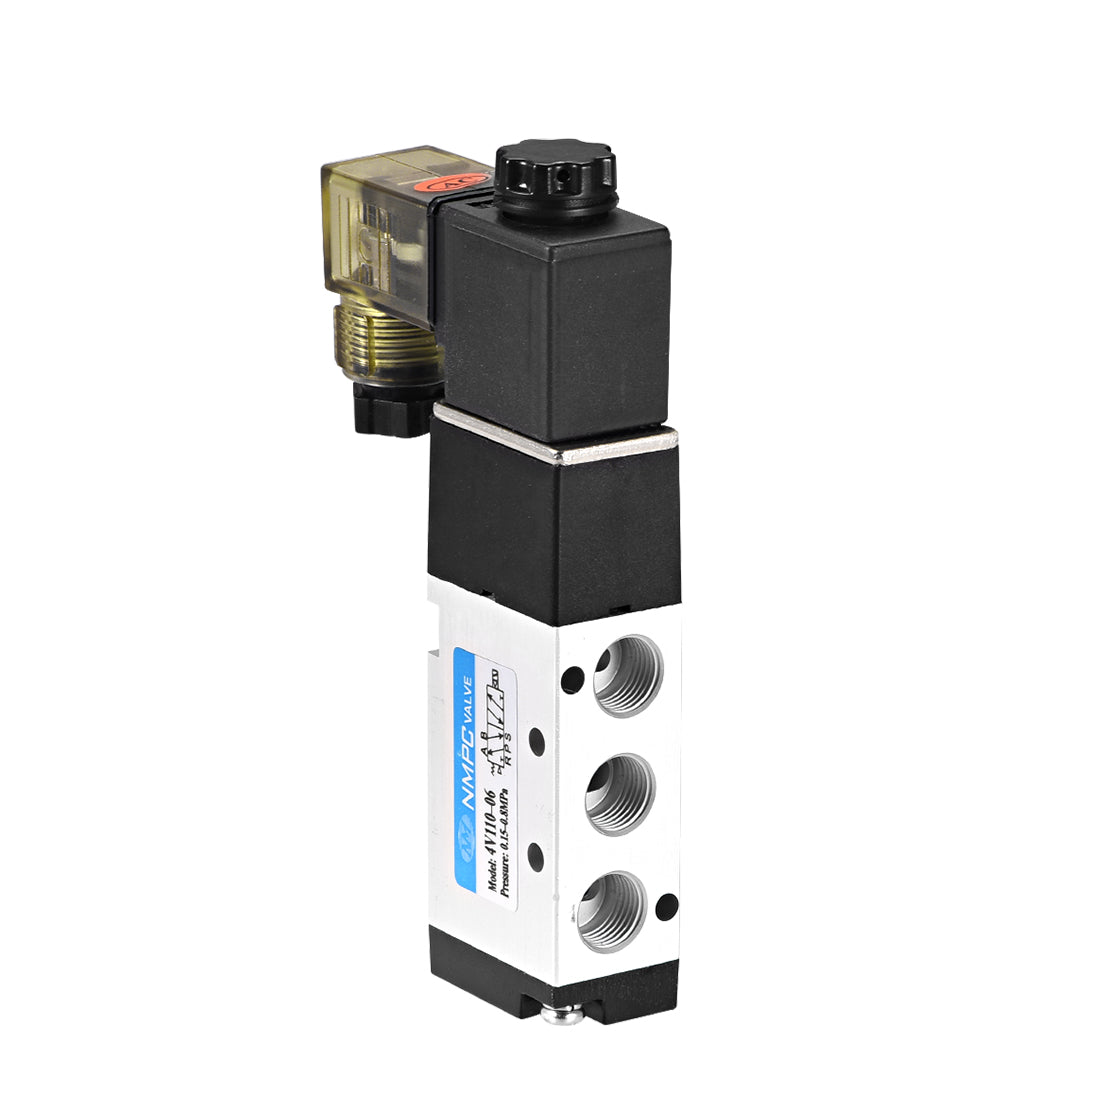 uxcell Uxcell 4V110-06 Pneumatic Air Single Electrical Control Solenoid Valve AC110V 5 Way 2 Position 1/8" PT Thread Internally Piloted Acting Type w LED Light